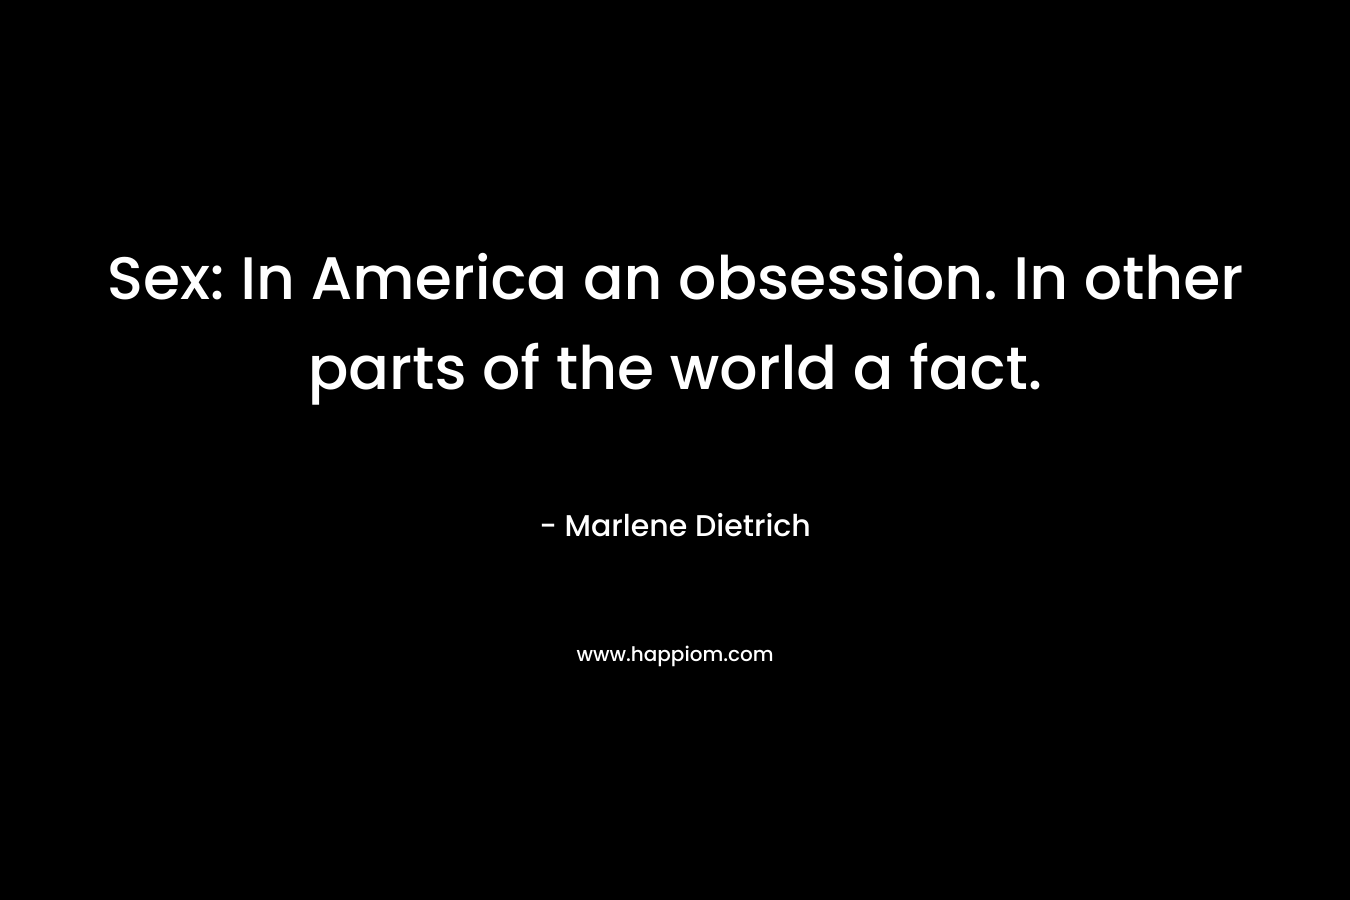 Sex: In America an obsession. In other parts of the world a fact. – Marlene Dietrich